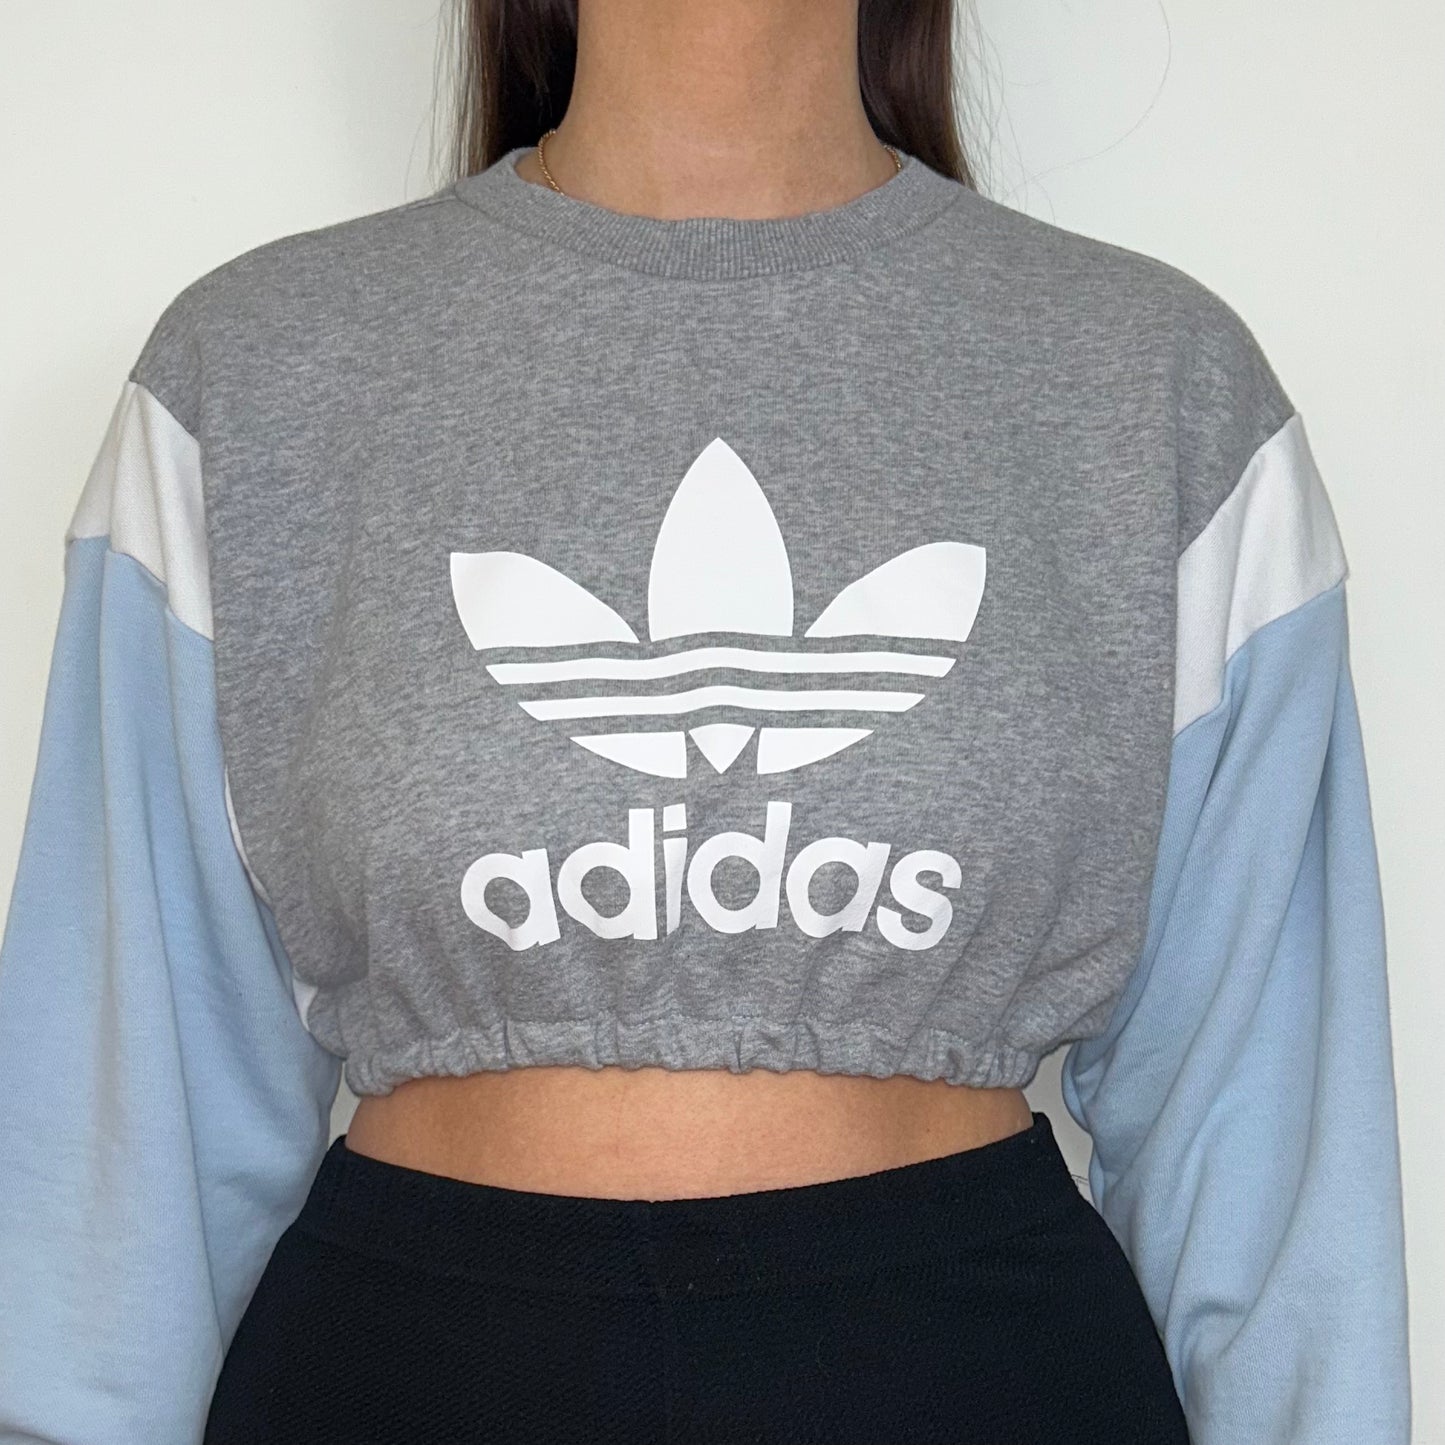 close up of grey and blue cropped sweatshirt with white adidas logo shown on a model